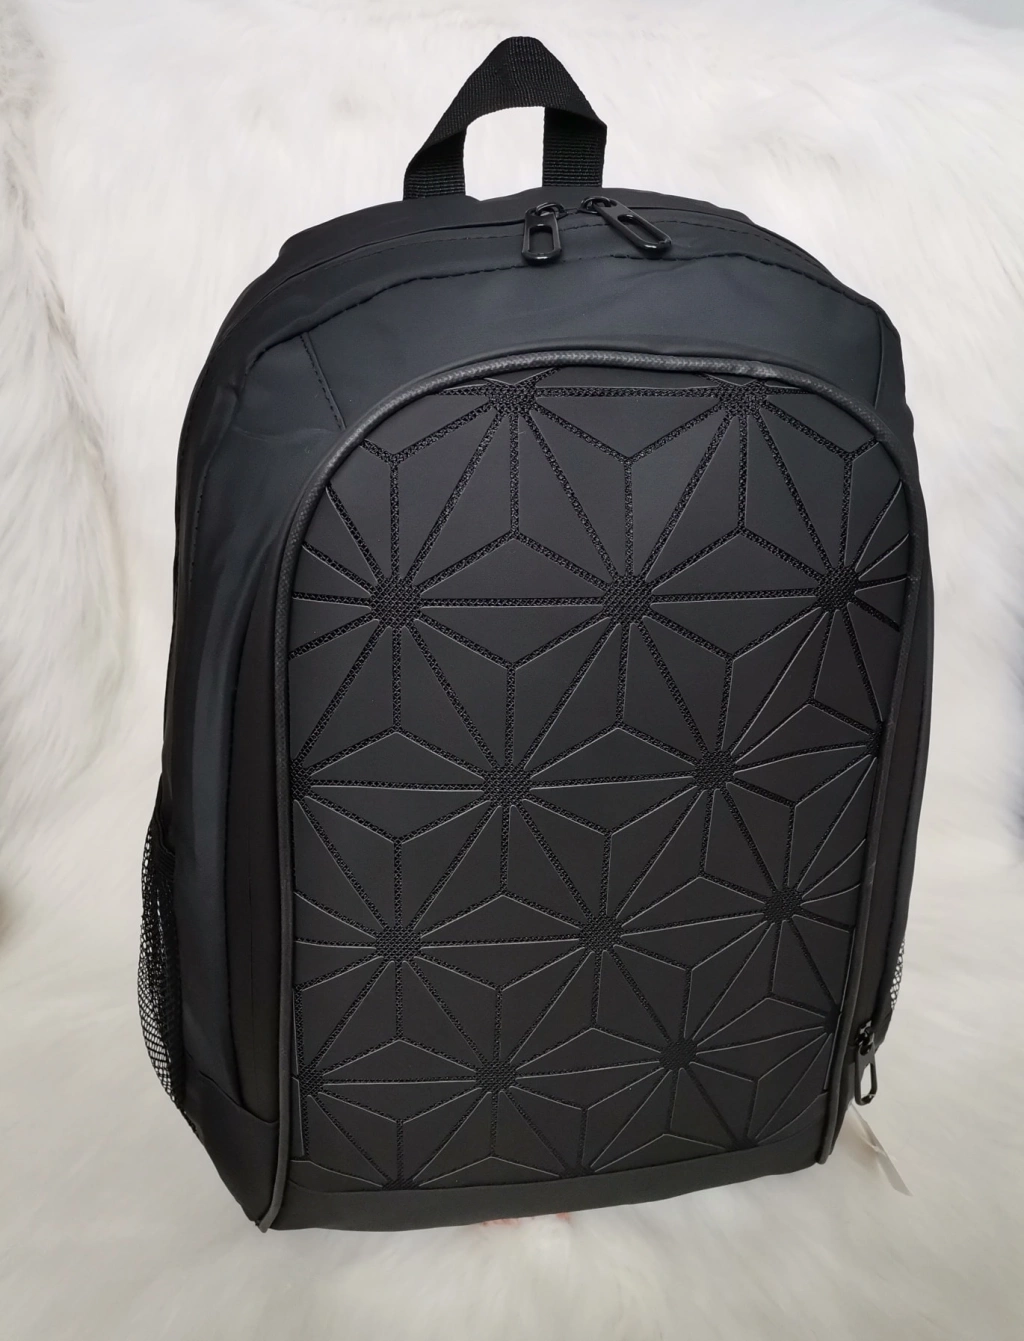 Black holographic backpack with two compartments